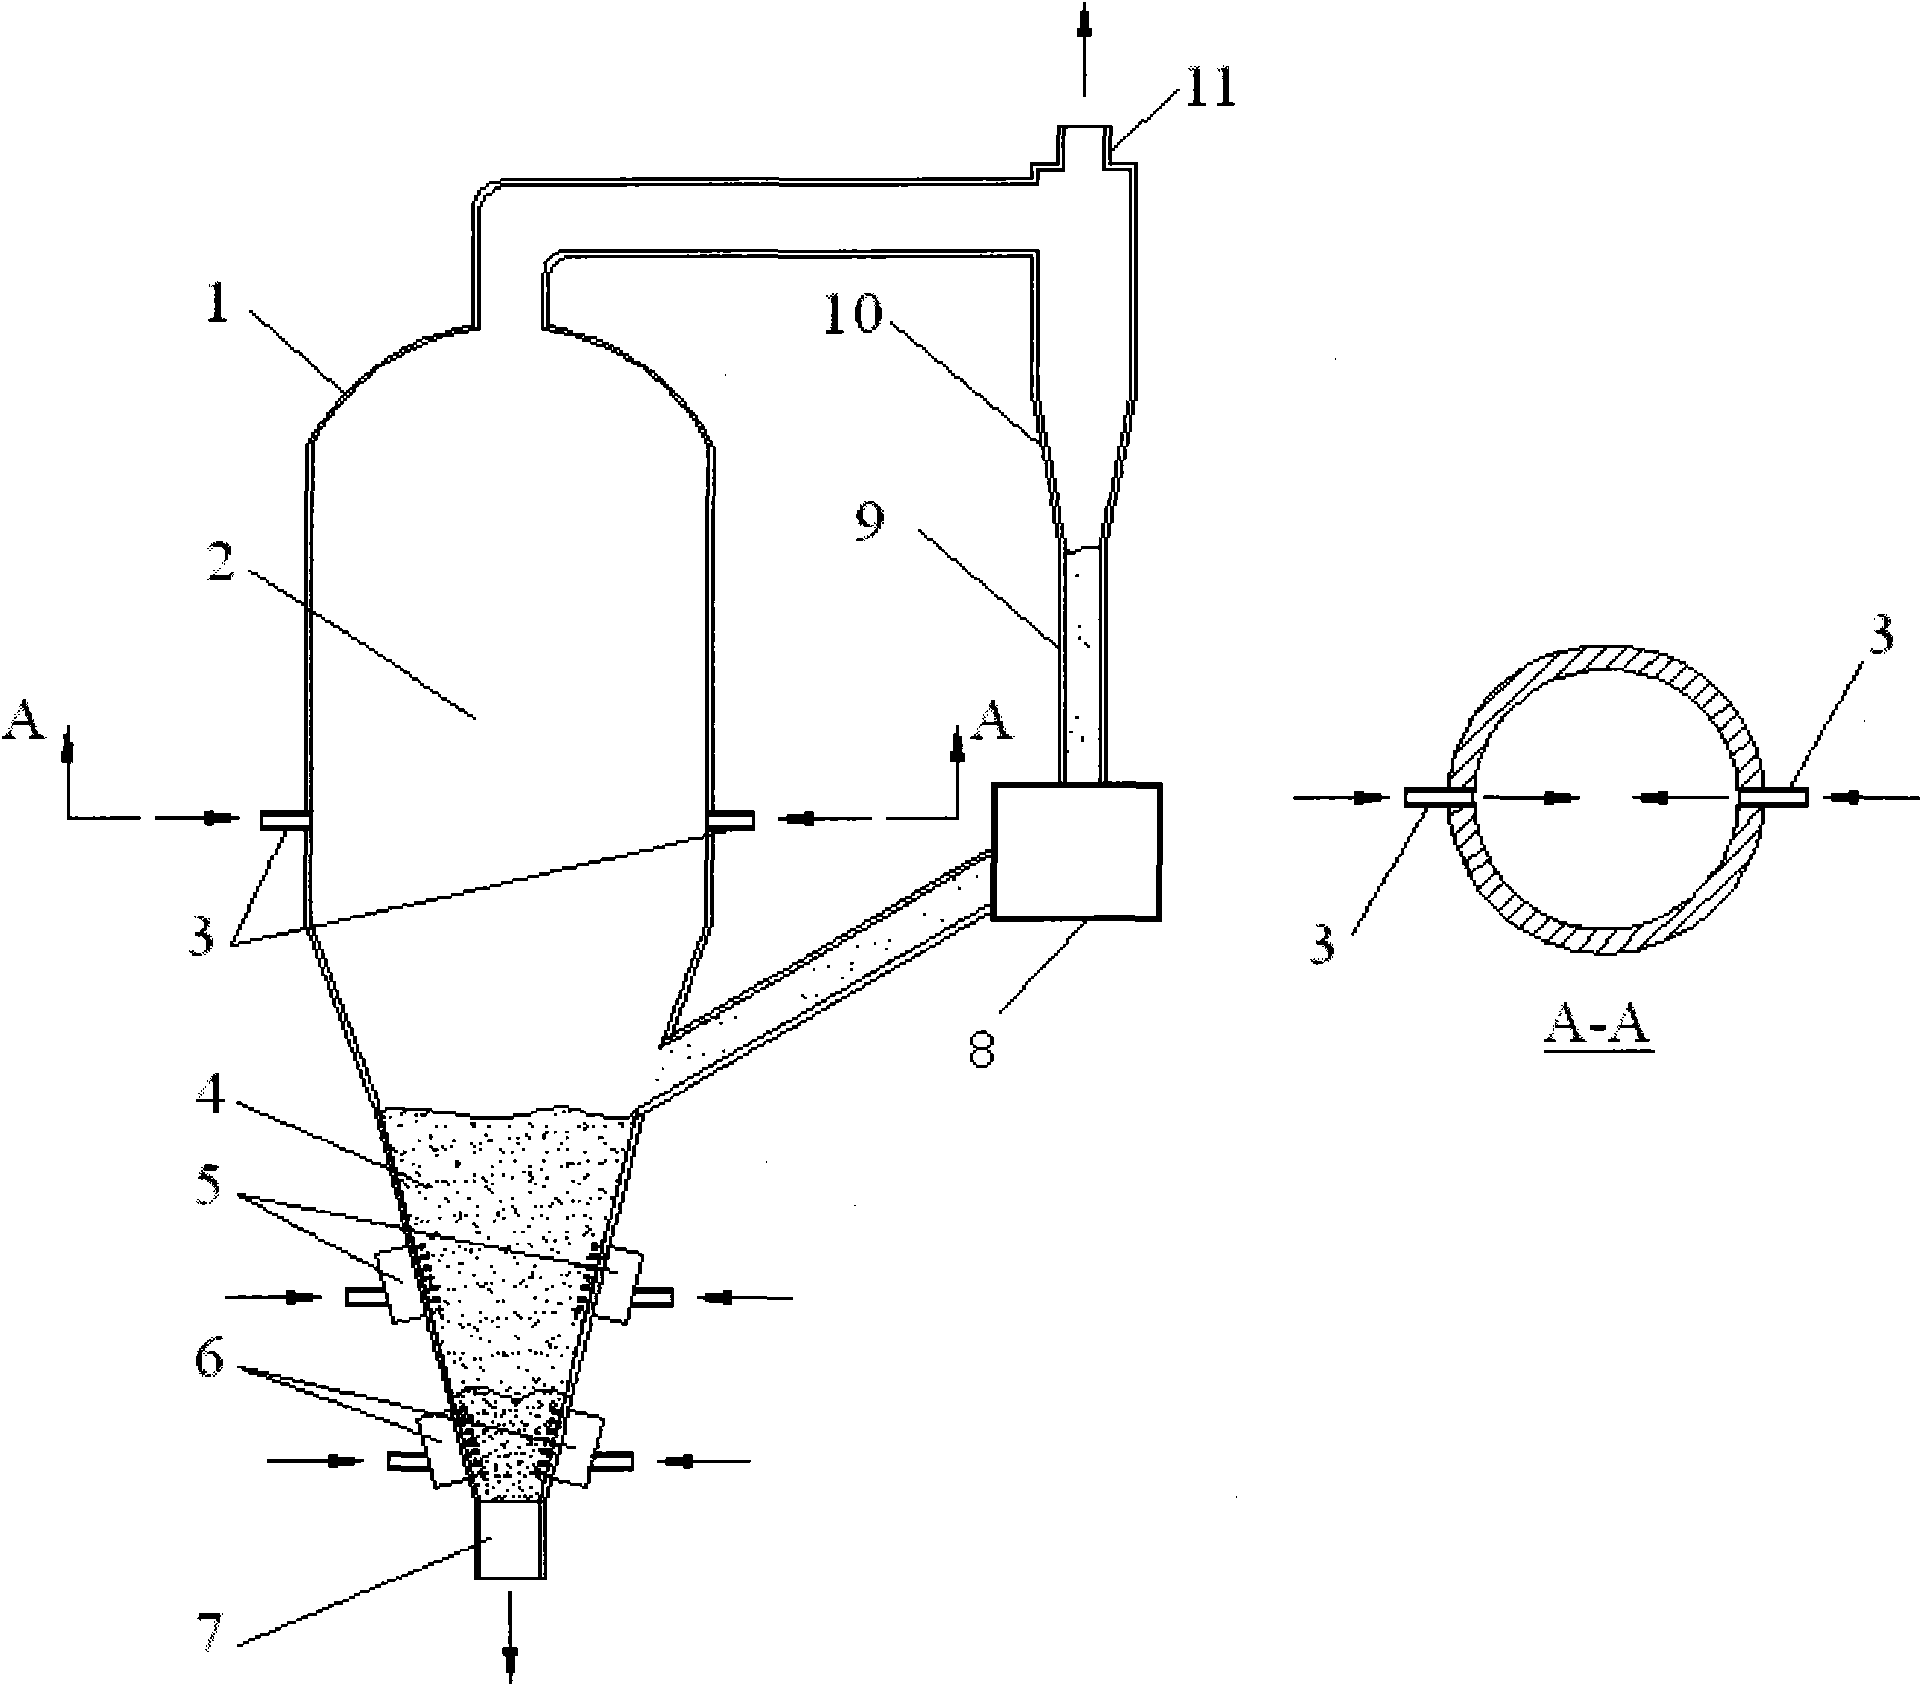 Method and device for jet/preoxidation/pyrolysis/fluidized bed gasification of carbon-containing solid fuel